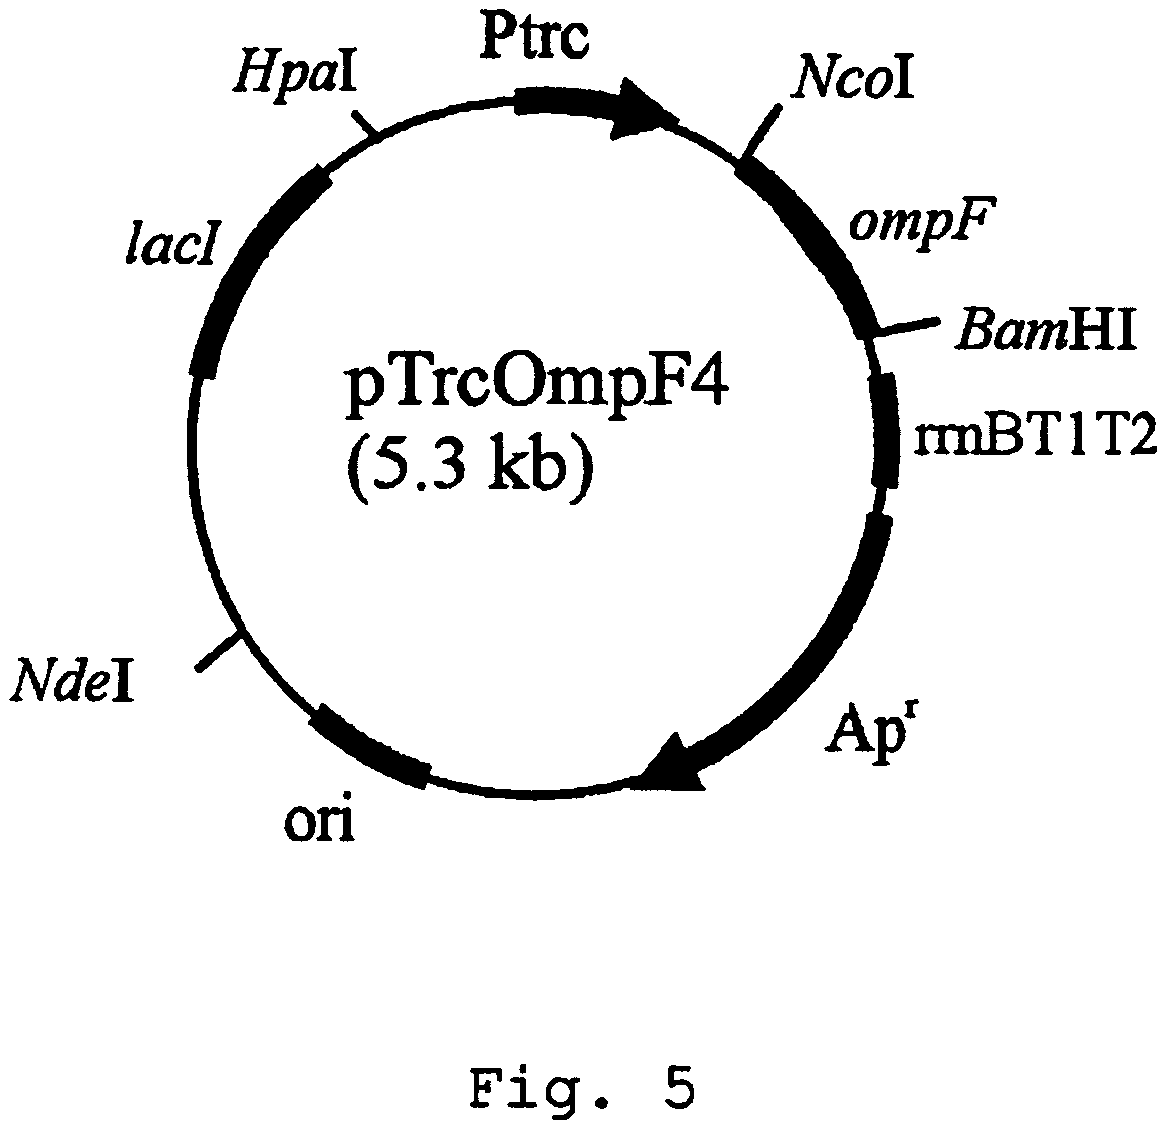 Method for extracellular production of target proteins employing OmpF in E. coli